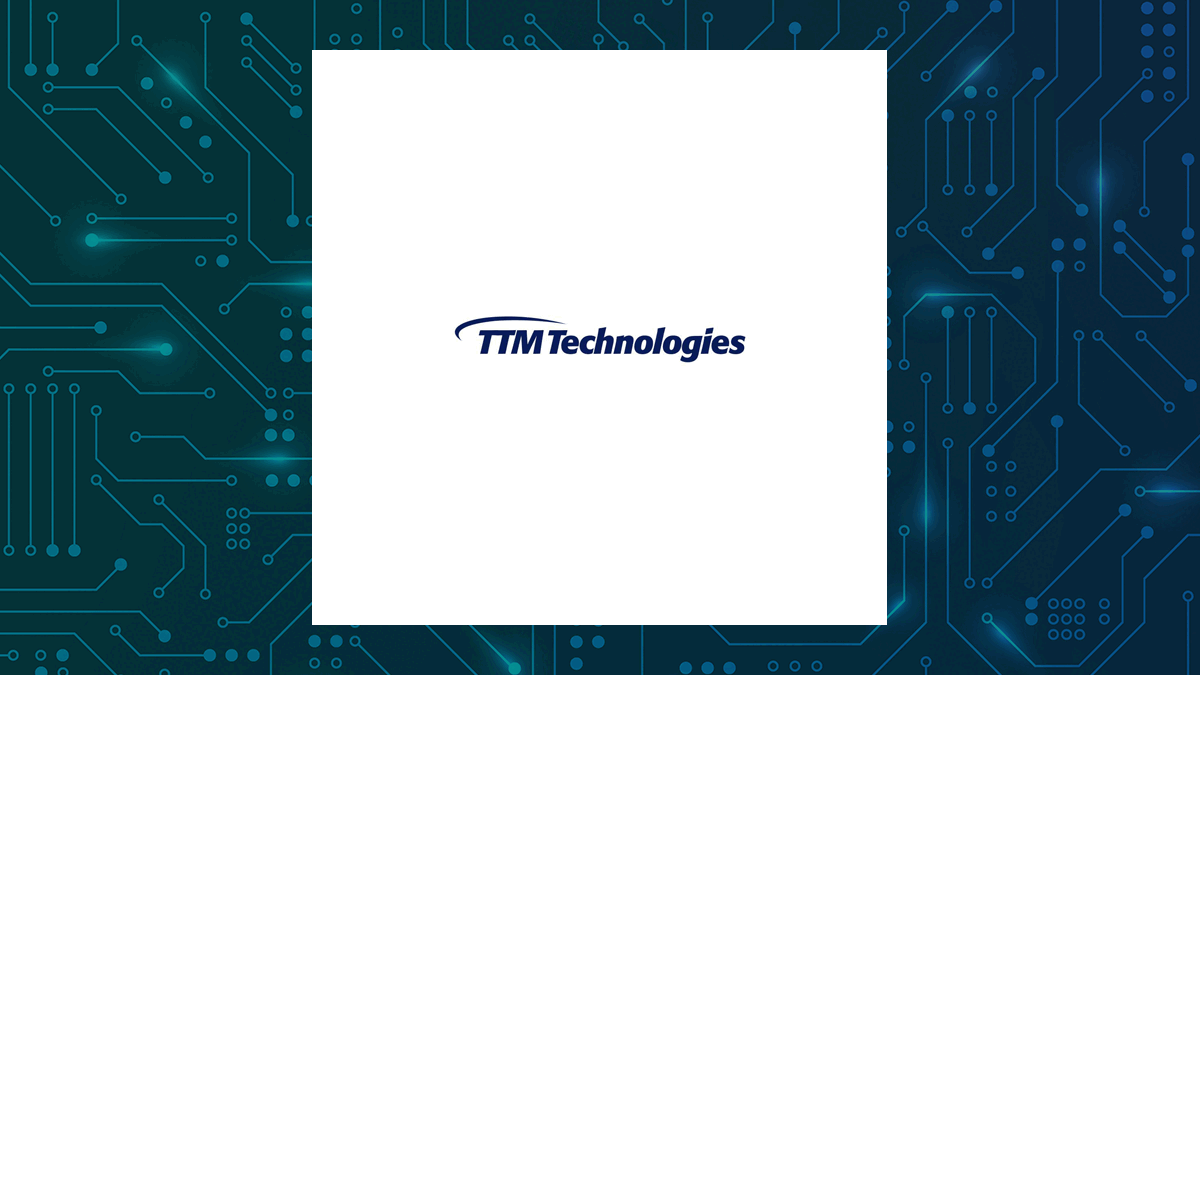 TTM Technologies logo with Computer and Technology background